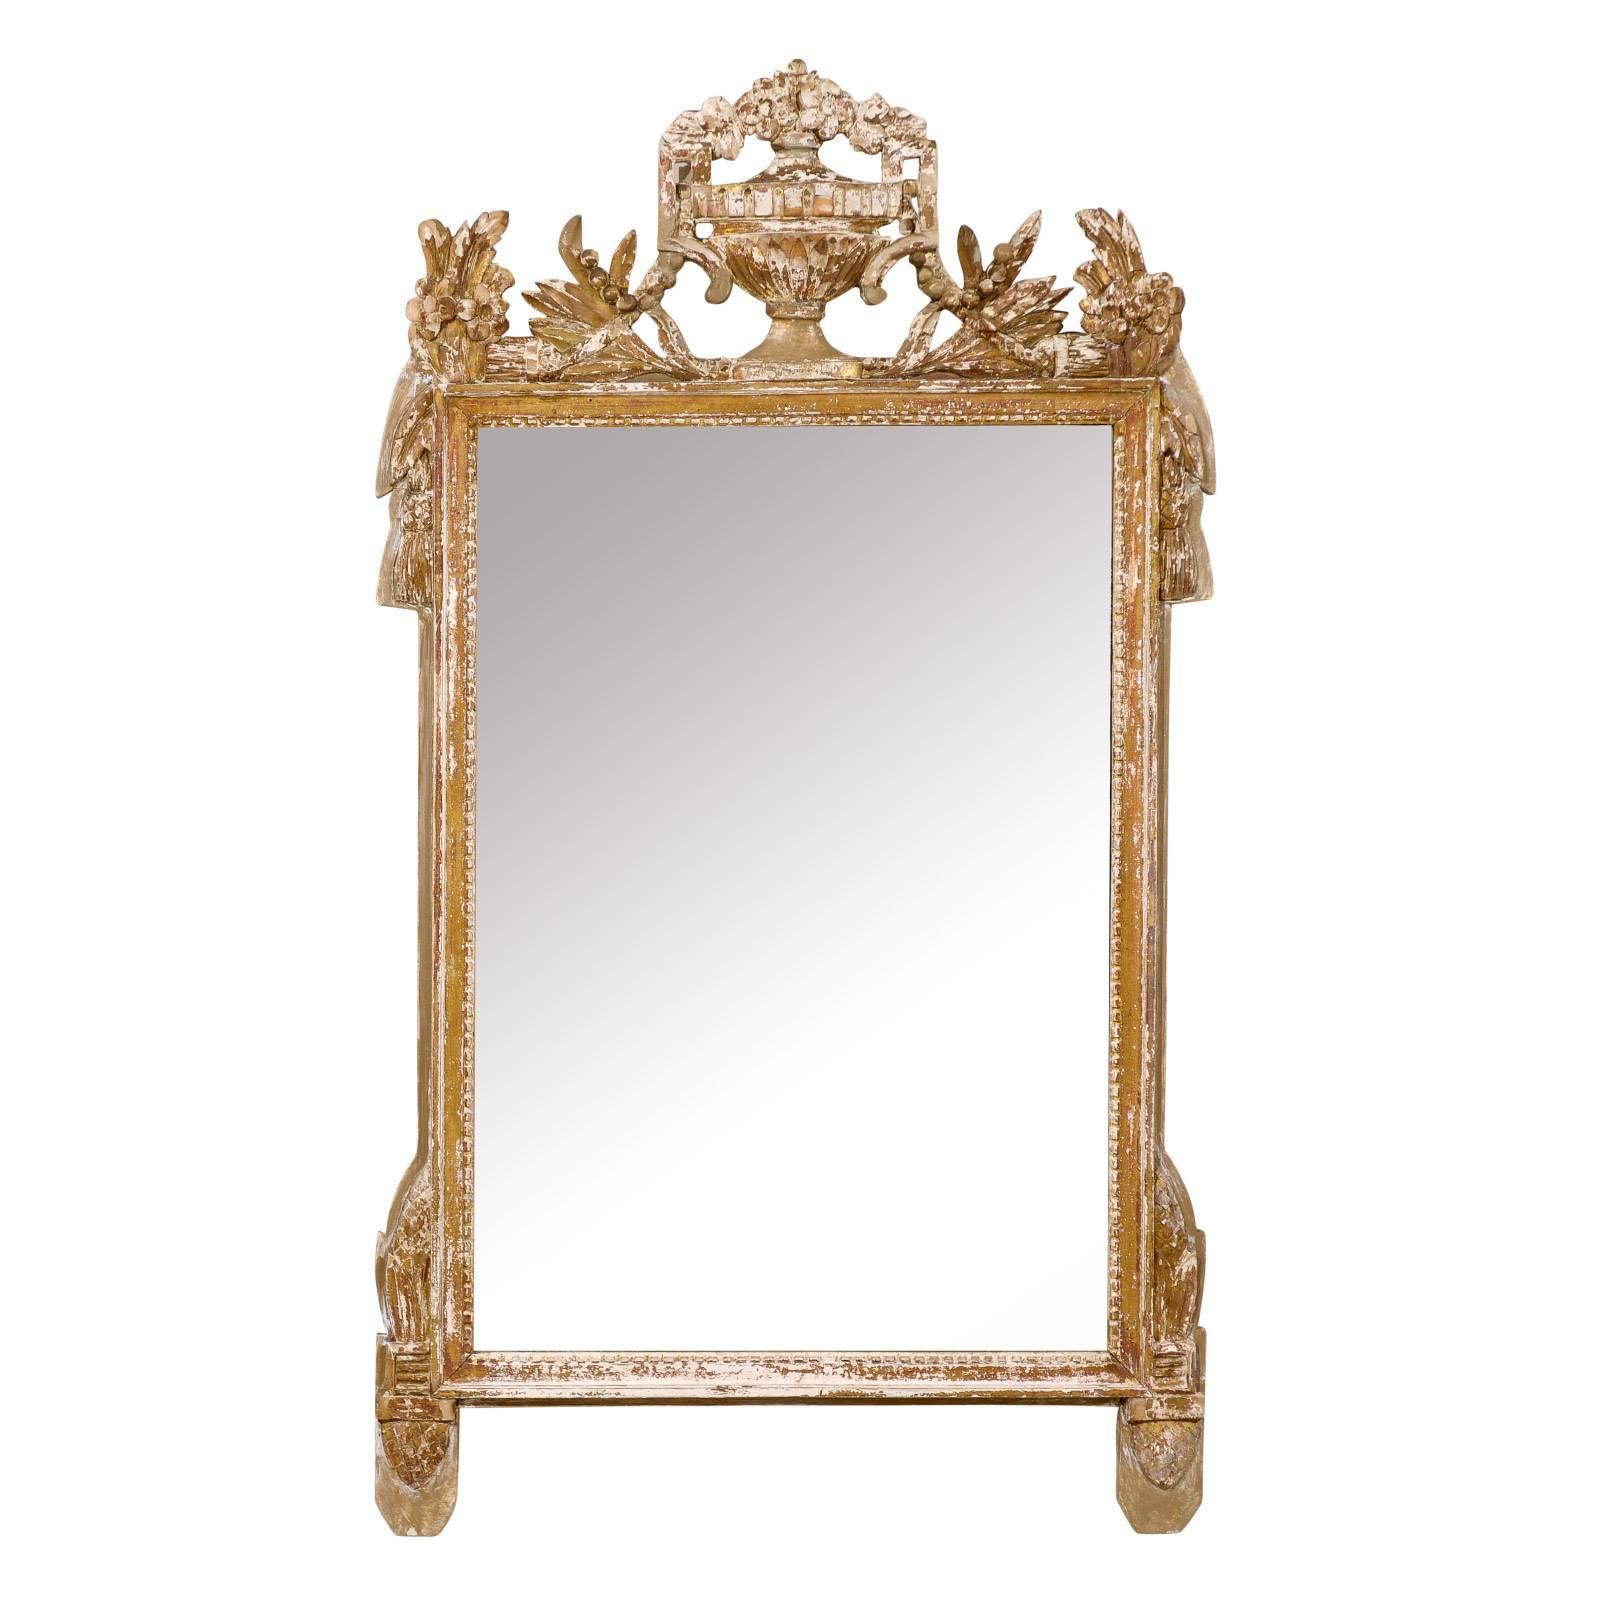 French Gilded and Ornately Carved Wood Mirror with Urn Motif Crest, Gold Color